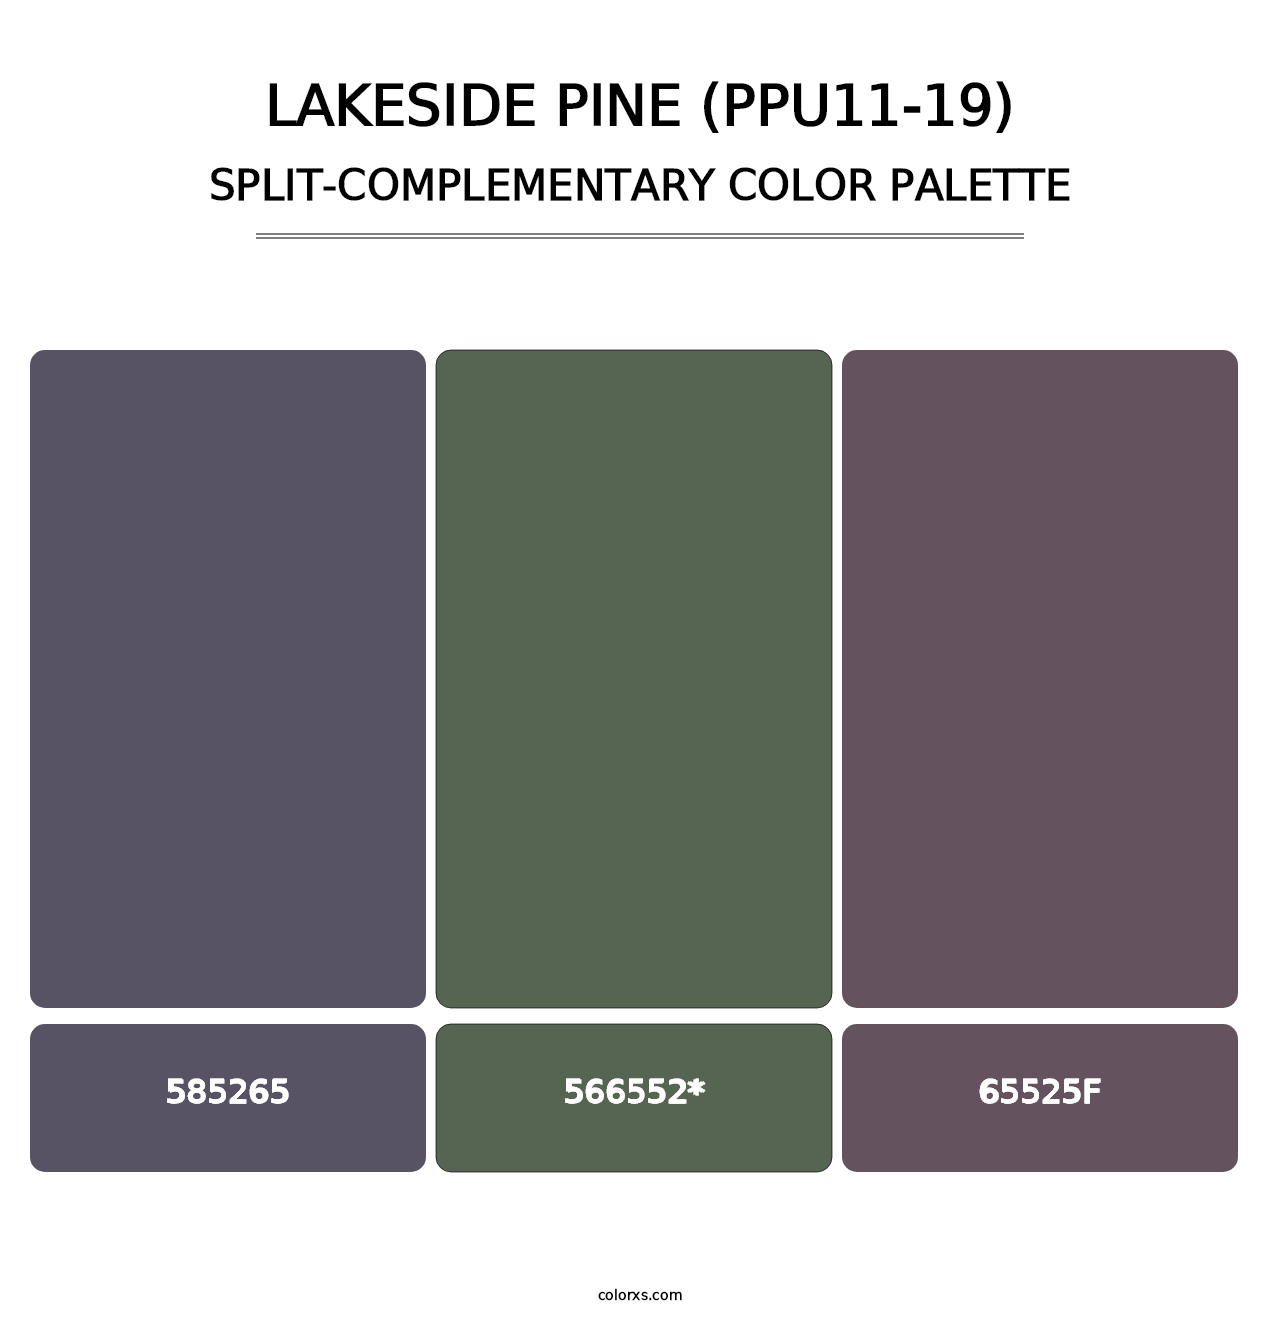 Lakeside Pine (PPU11-19) - Split-Complementary Color Palette